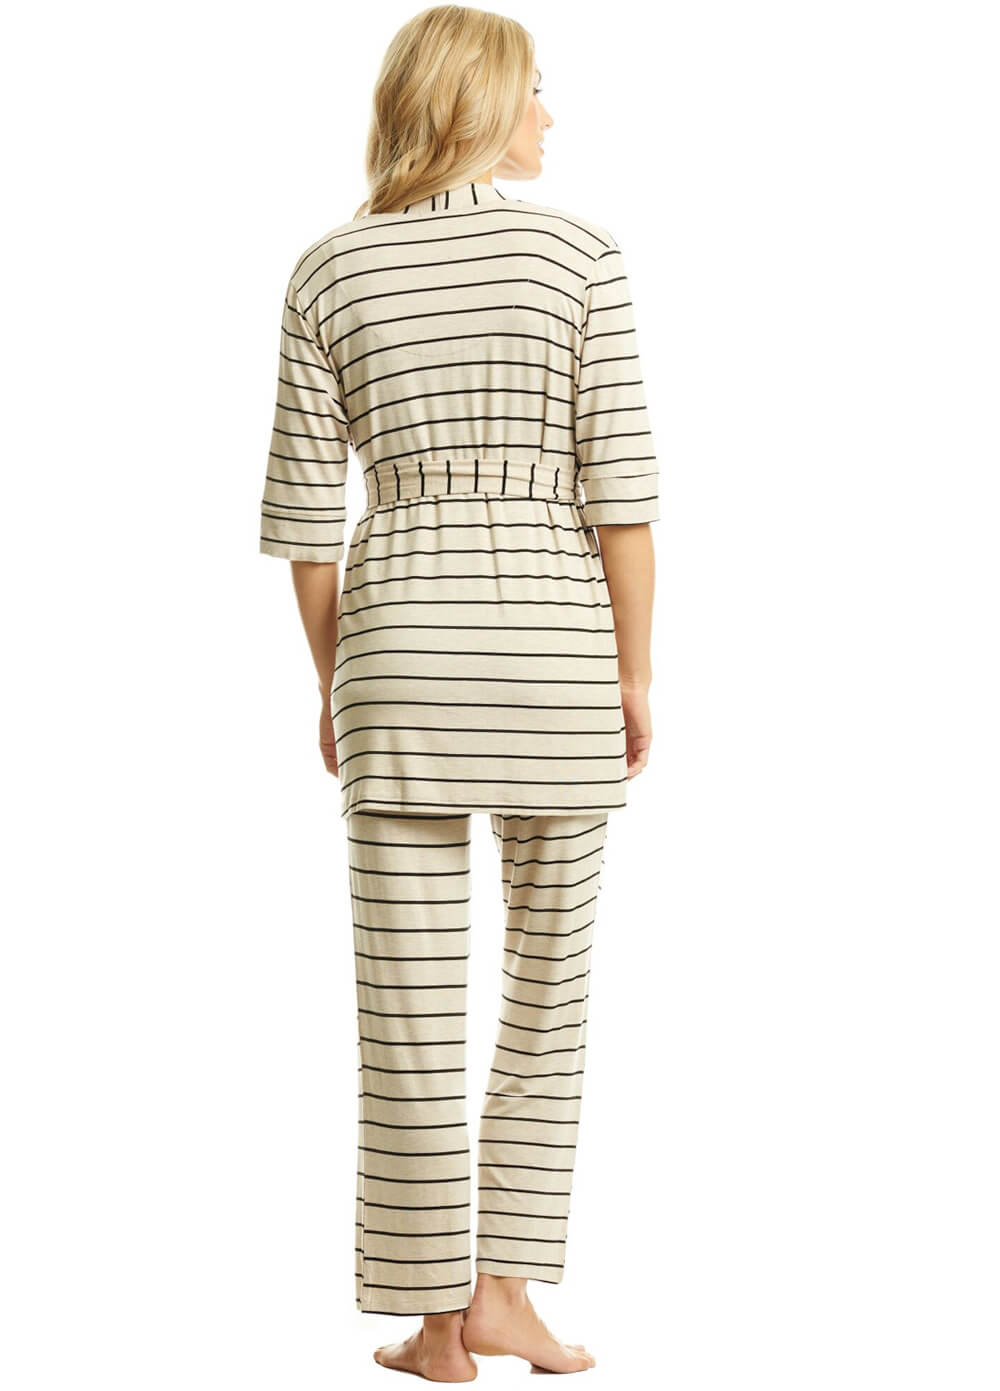 Analise Mommy & Me PJ Gift Set in Sand Stripes by Everly Grey 